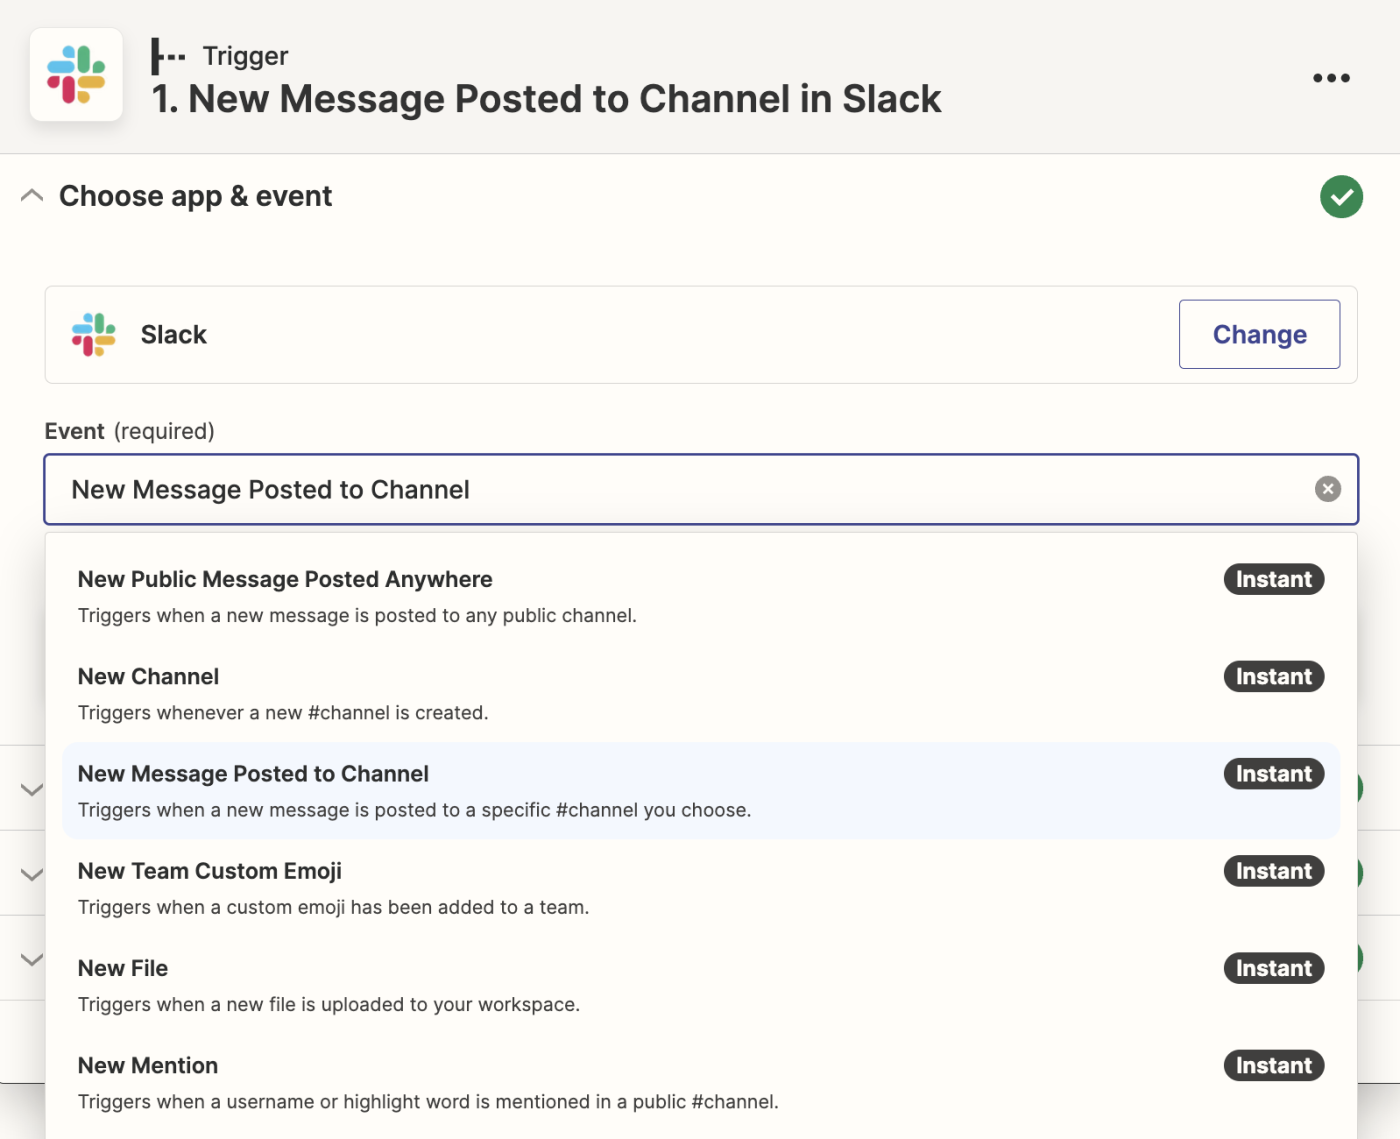 A screenshot of the setup for a Slack trigger event in the Zapier editor.